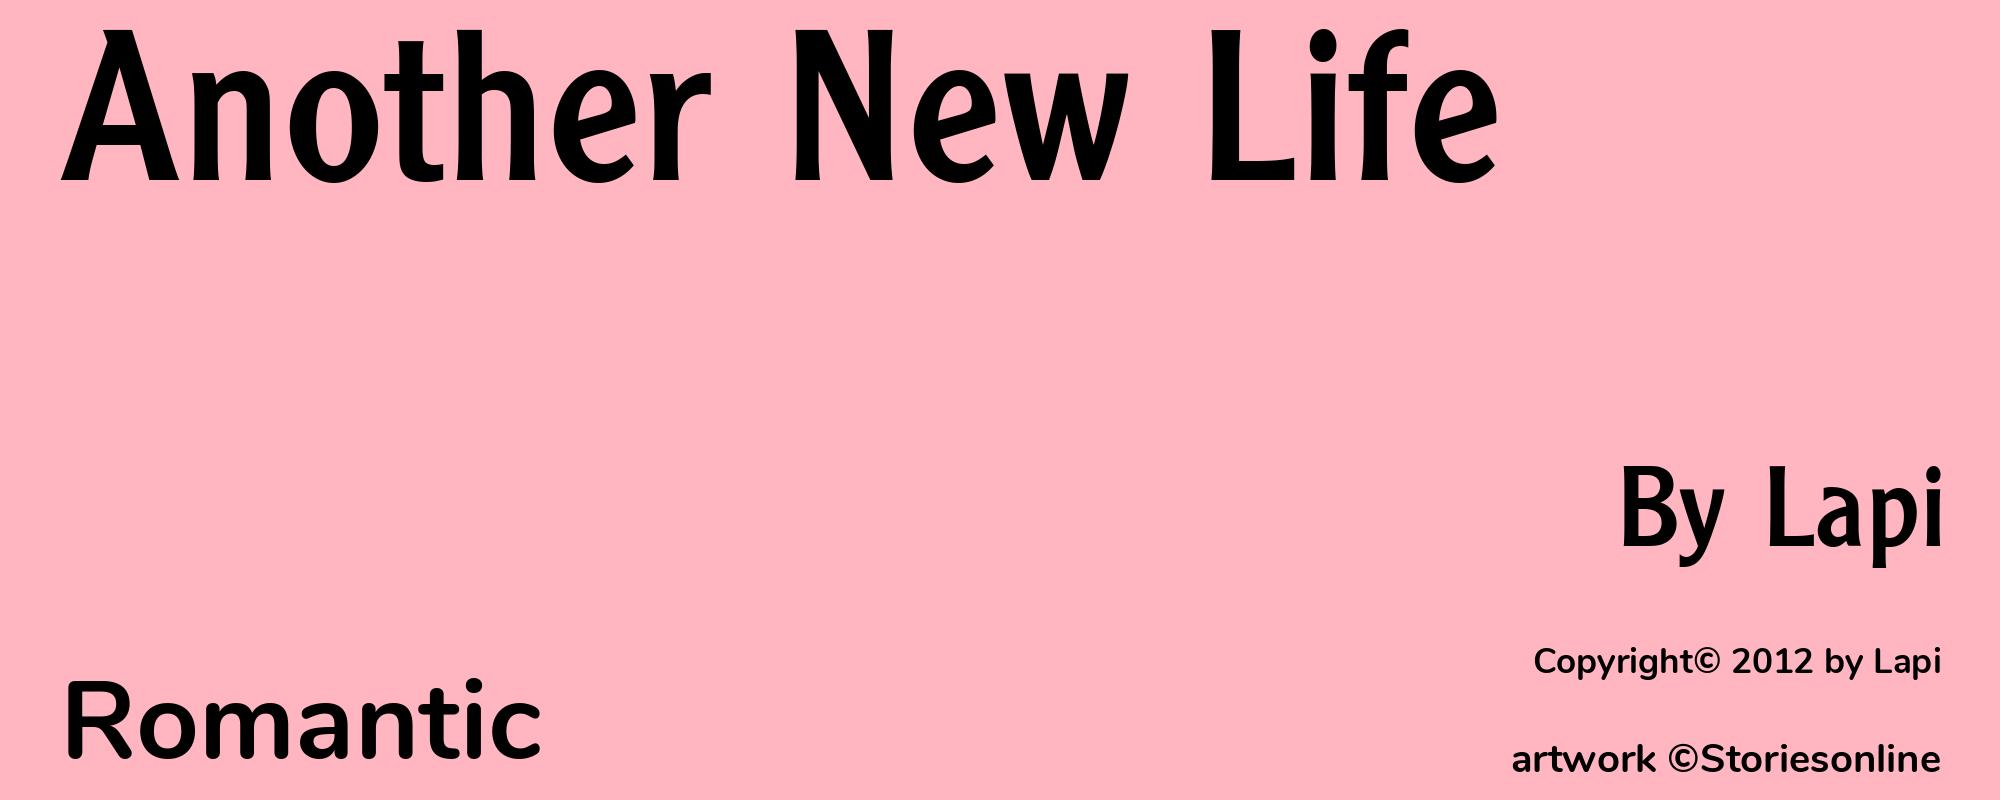 Another New Life - Cover